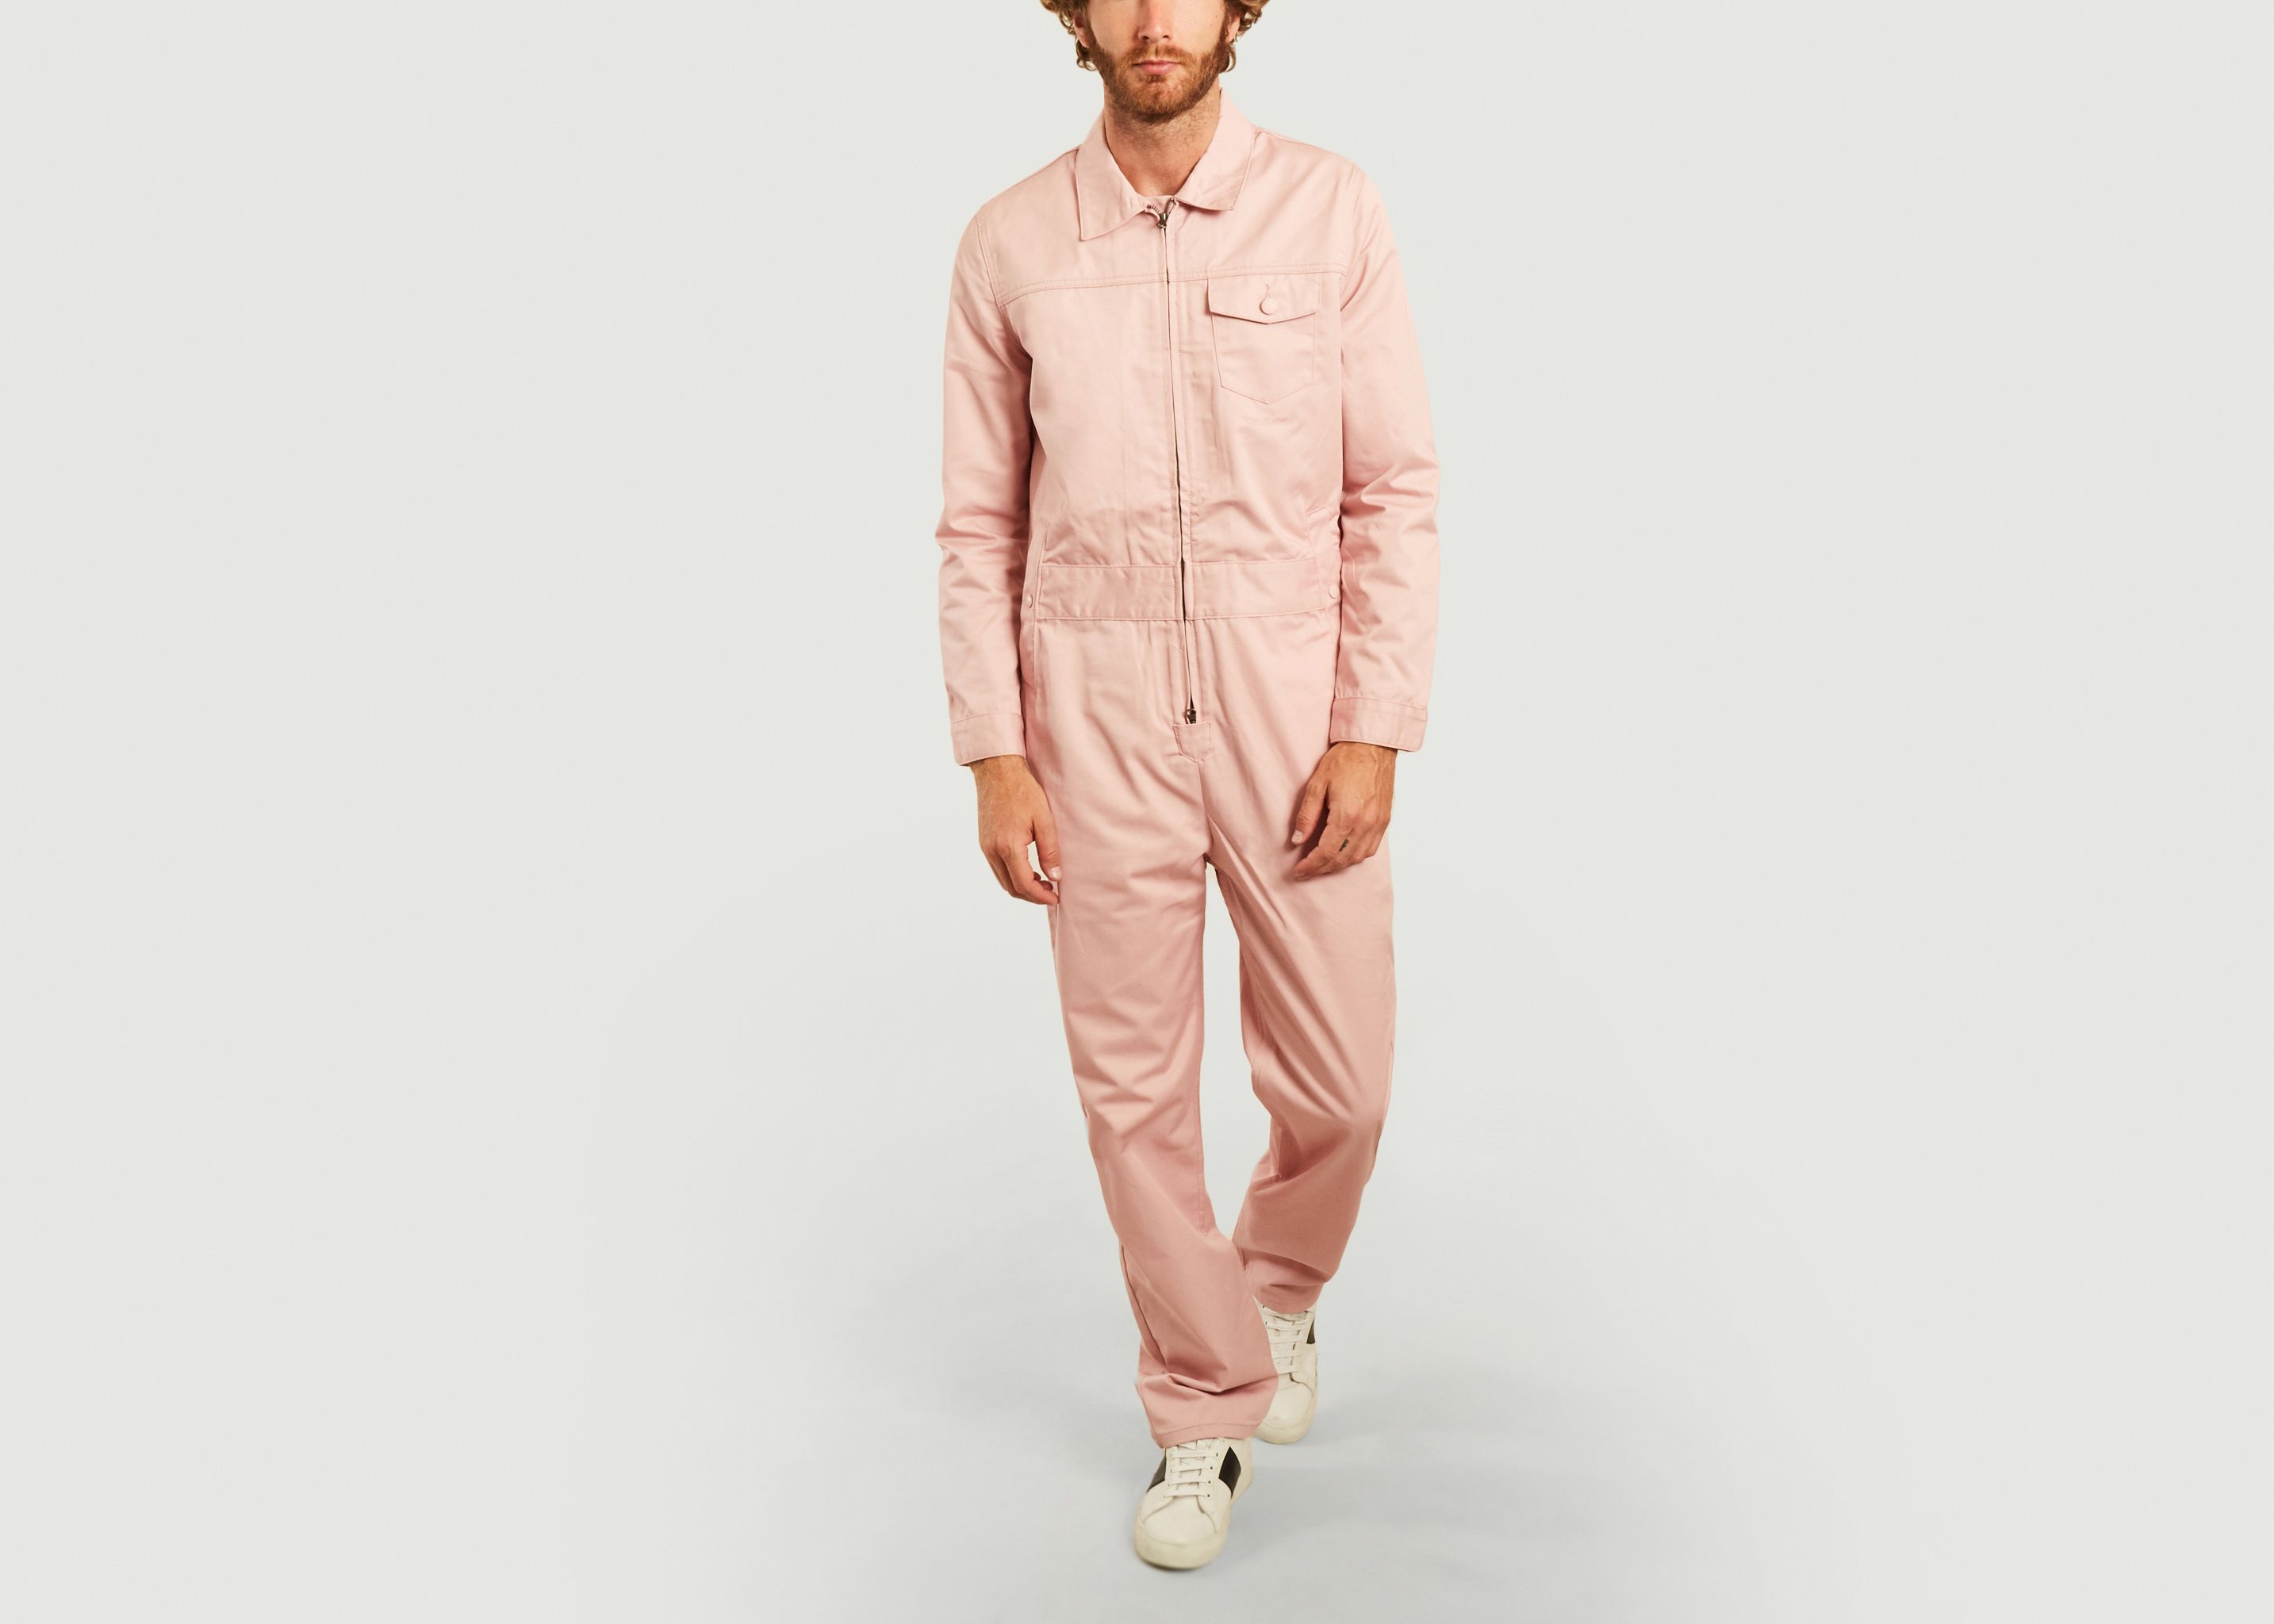 Canvas long sleeves jumpsuit - M.C. Overalls